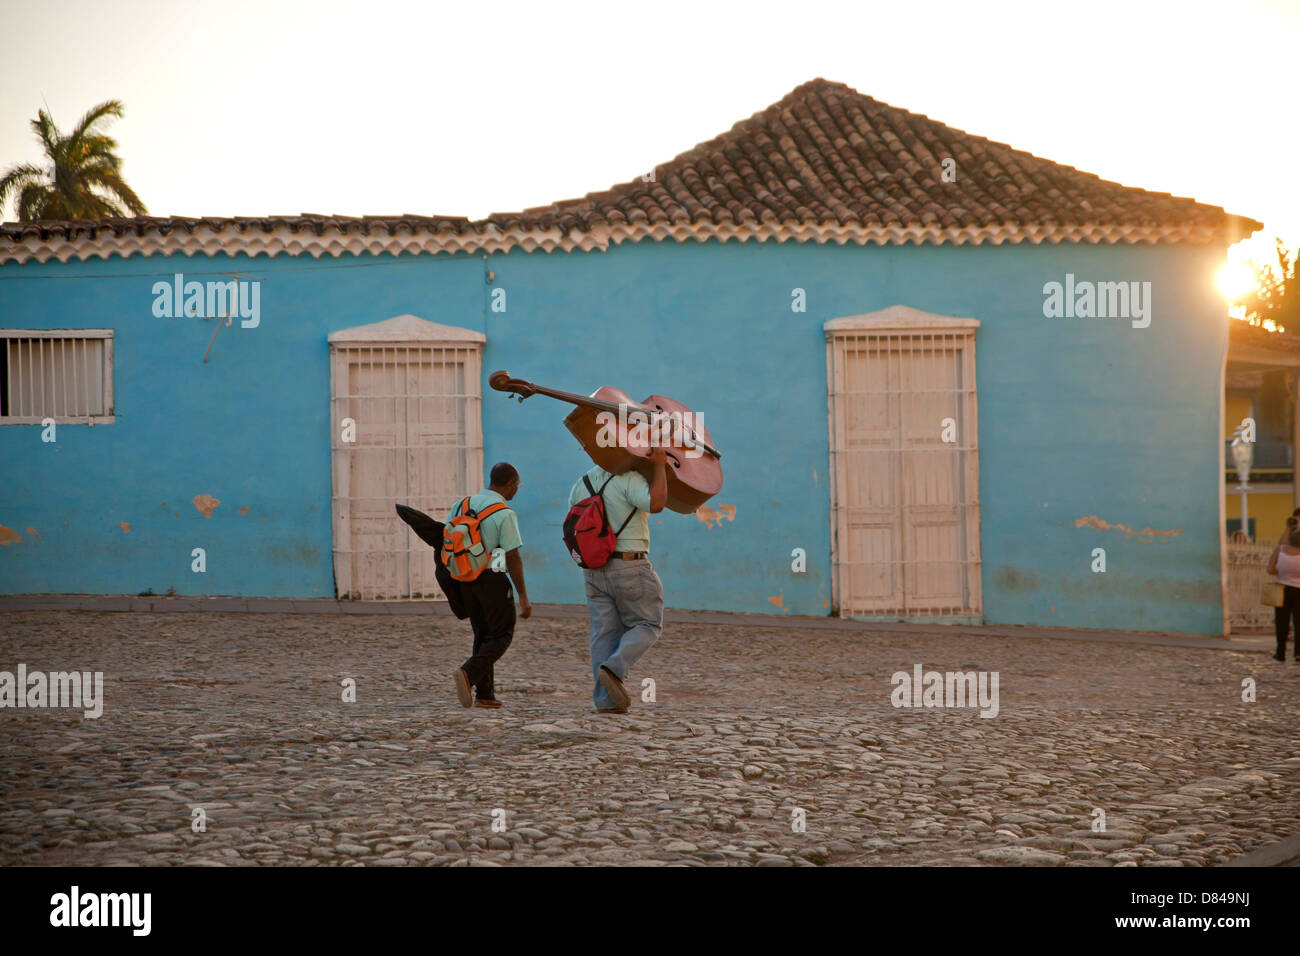 street musician with Double bass on their way home in the old town of Trinidad, Cuba, Caribbean Stock Photo